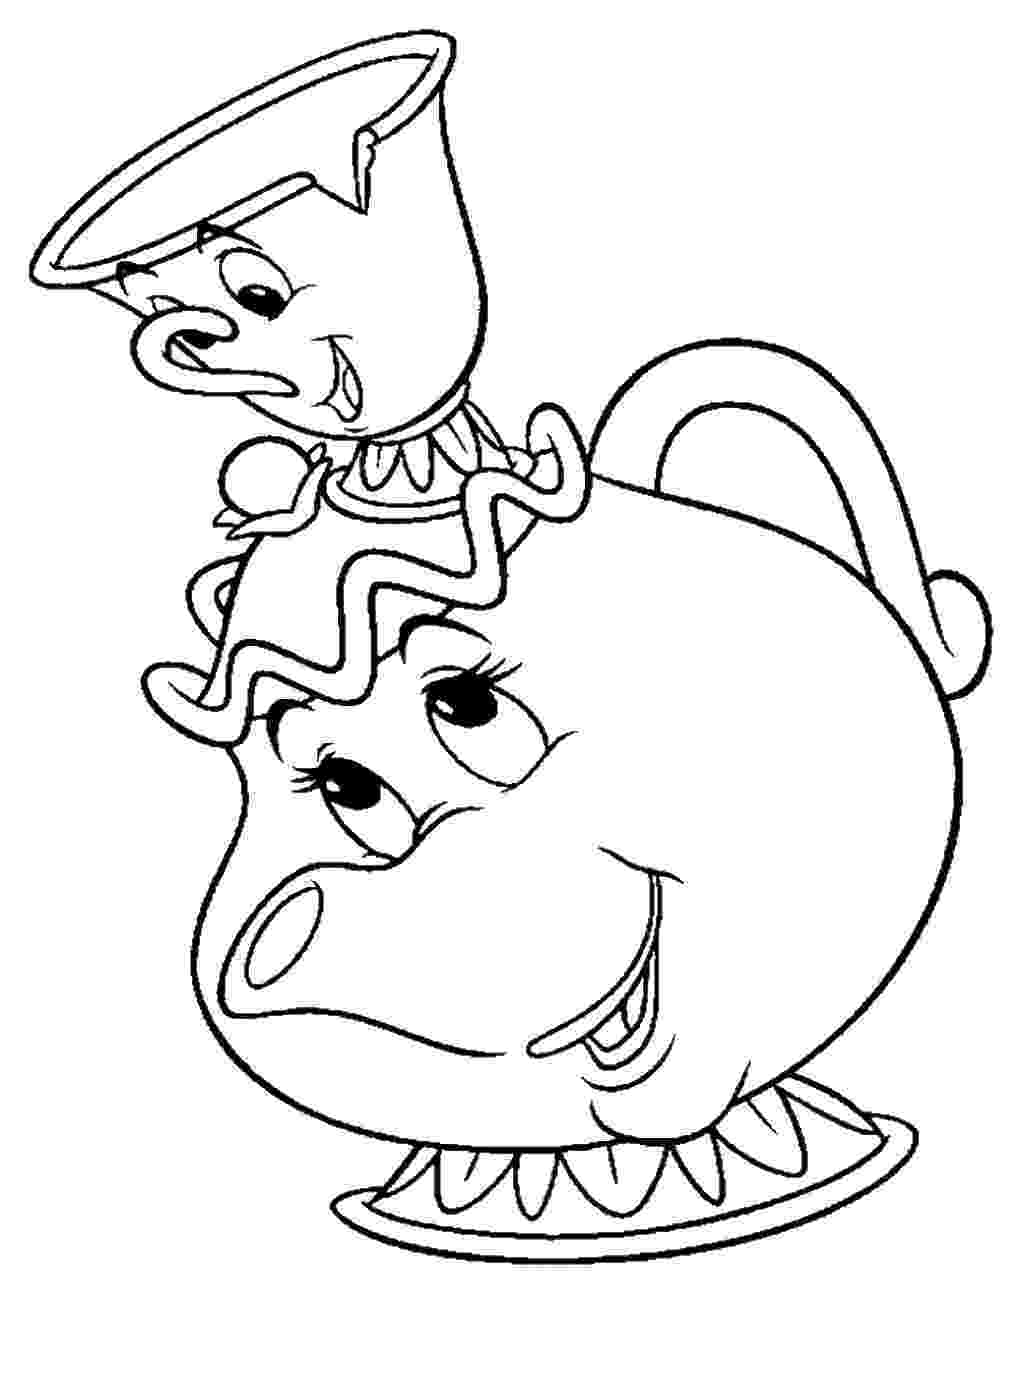 beauty and the beast pictures to colour beauty and the beast coloring pages minister coloring to colour pictures beauty beast and the 